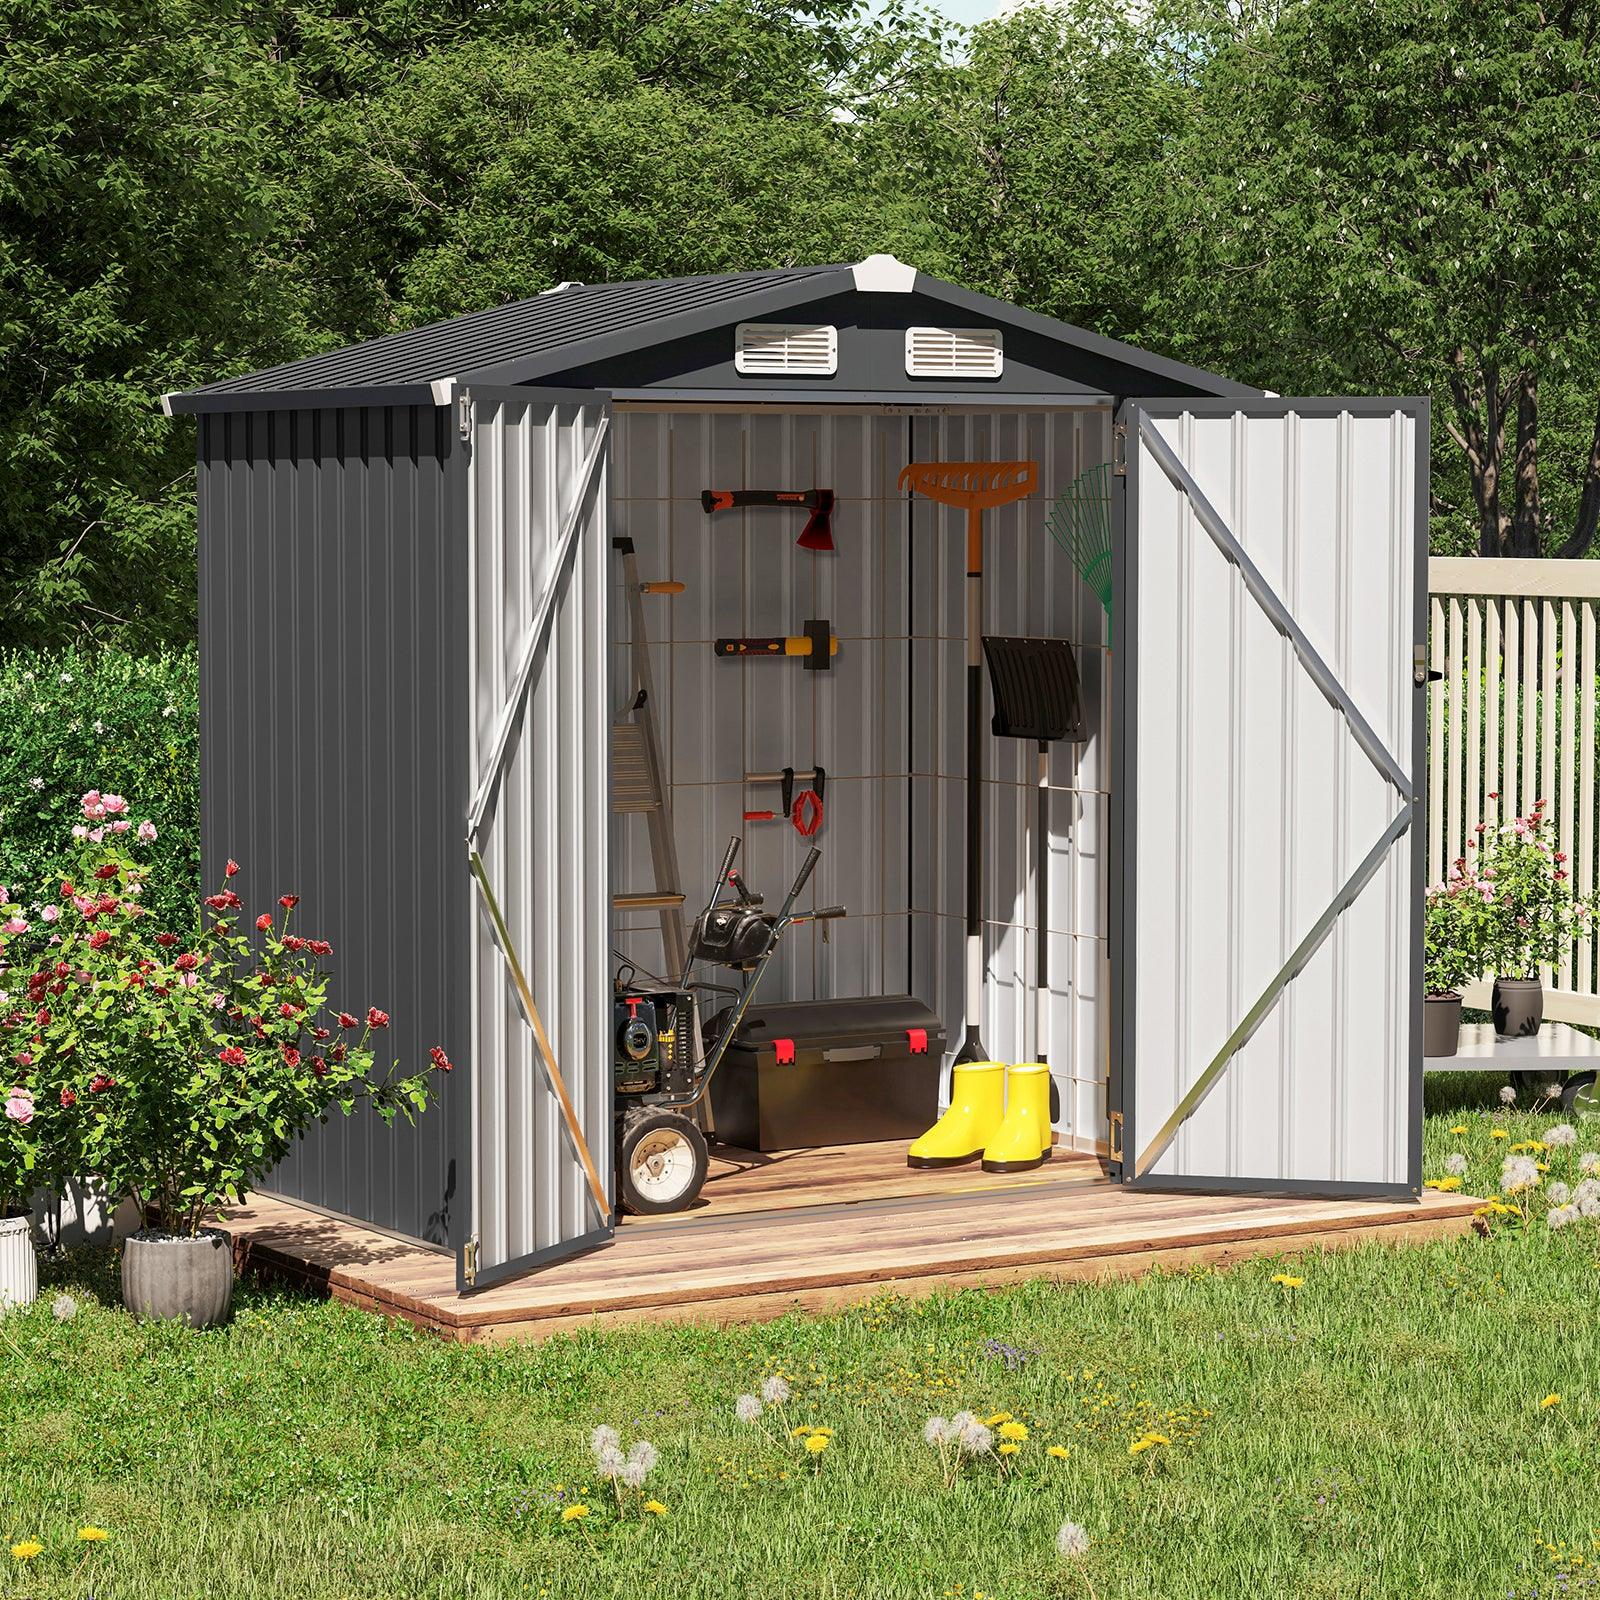 6'x 4' Outdoor Storage Shed, Metal Garden Tool Shed for Backyard, Patio, Lawn, Black